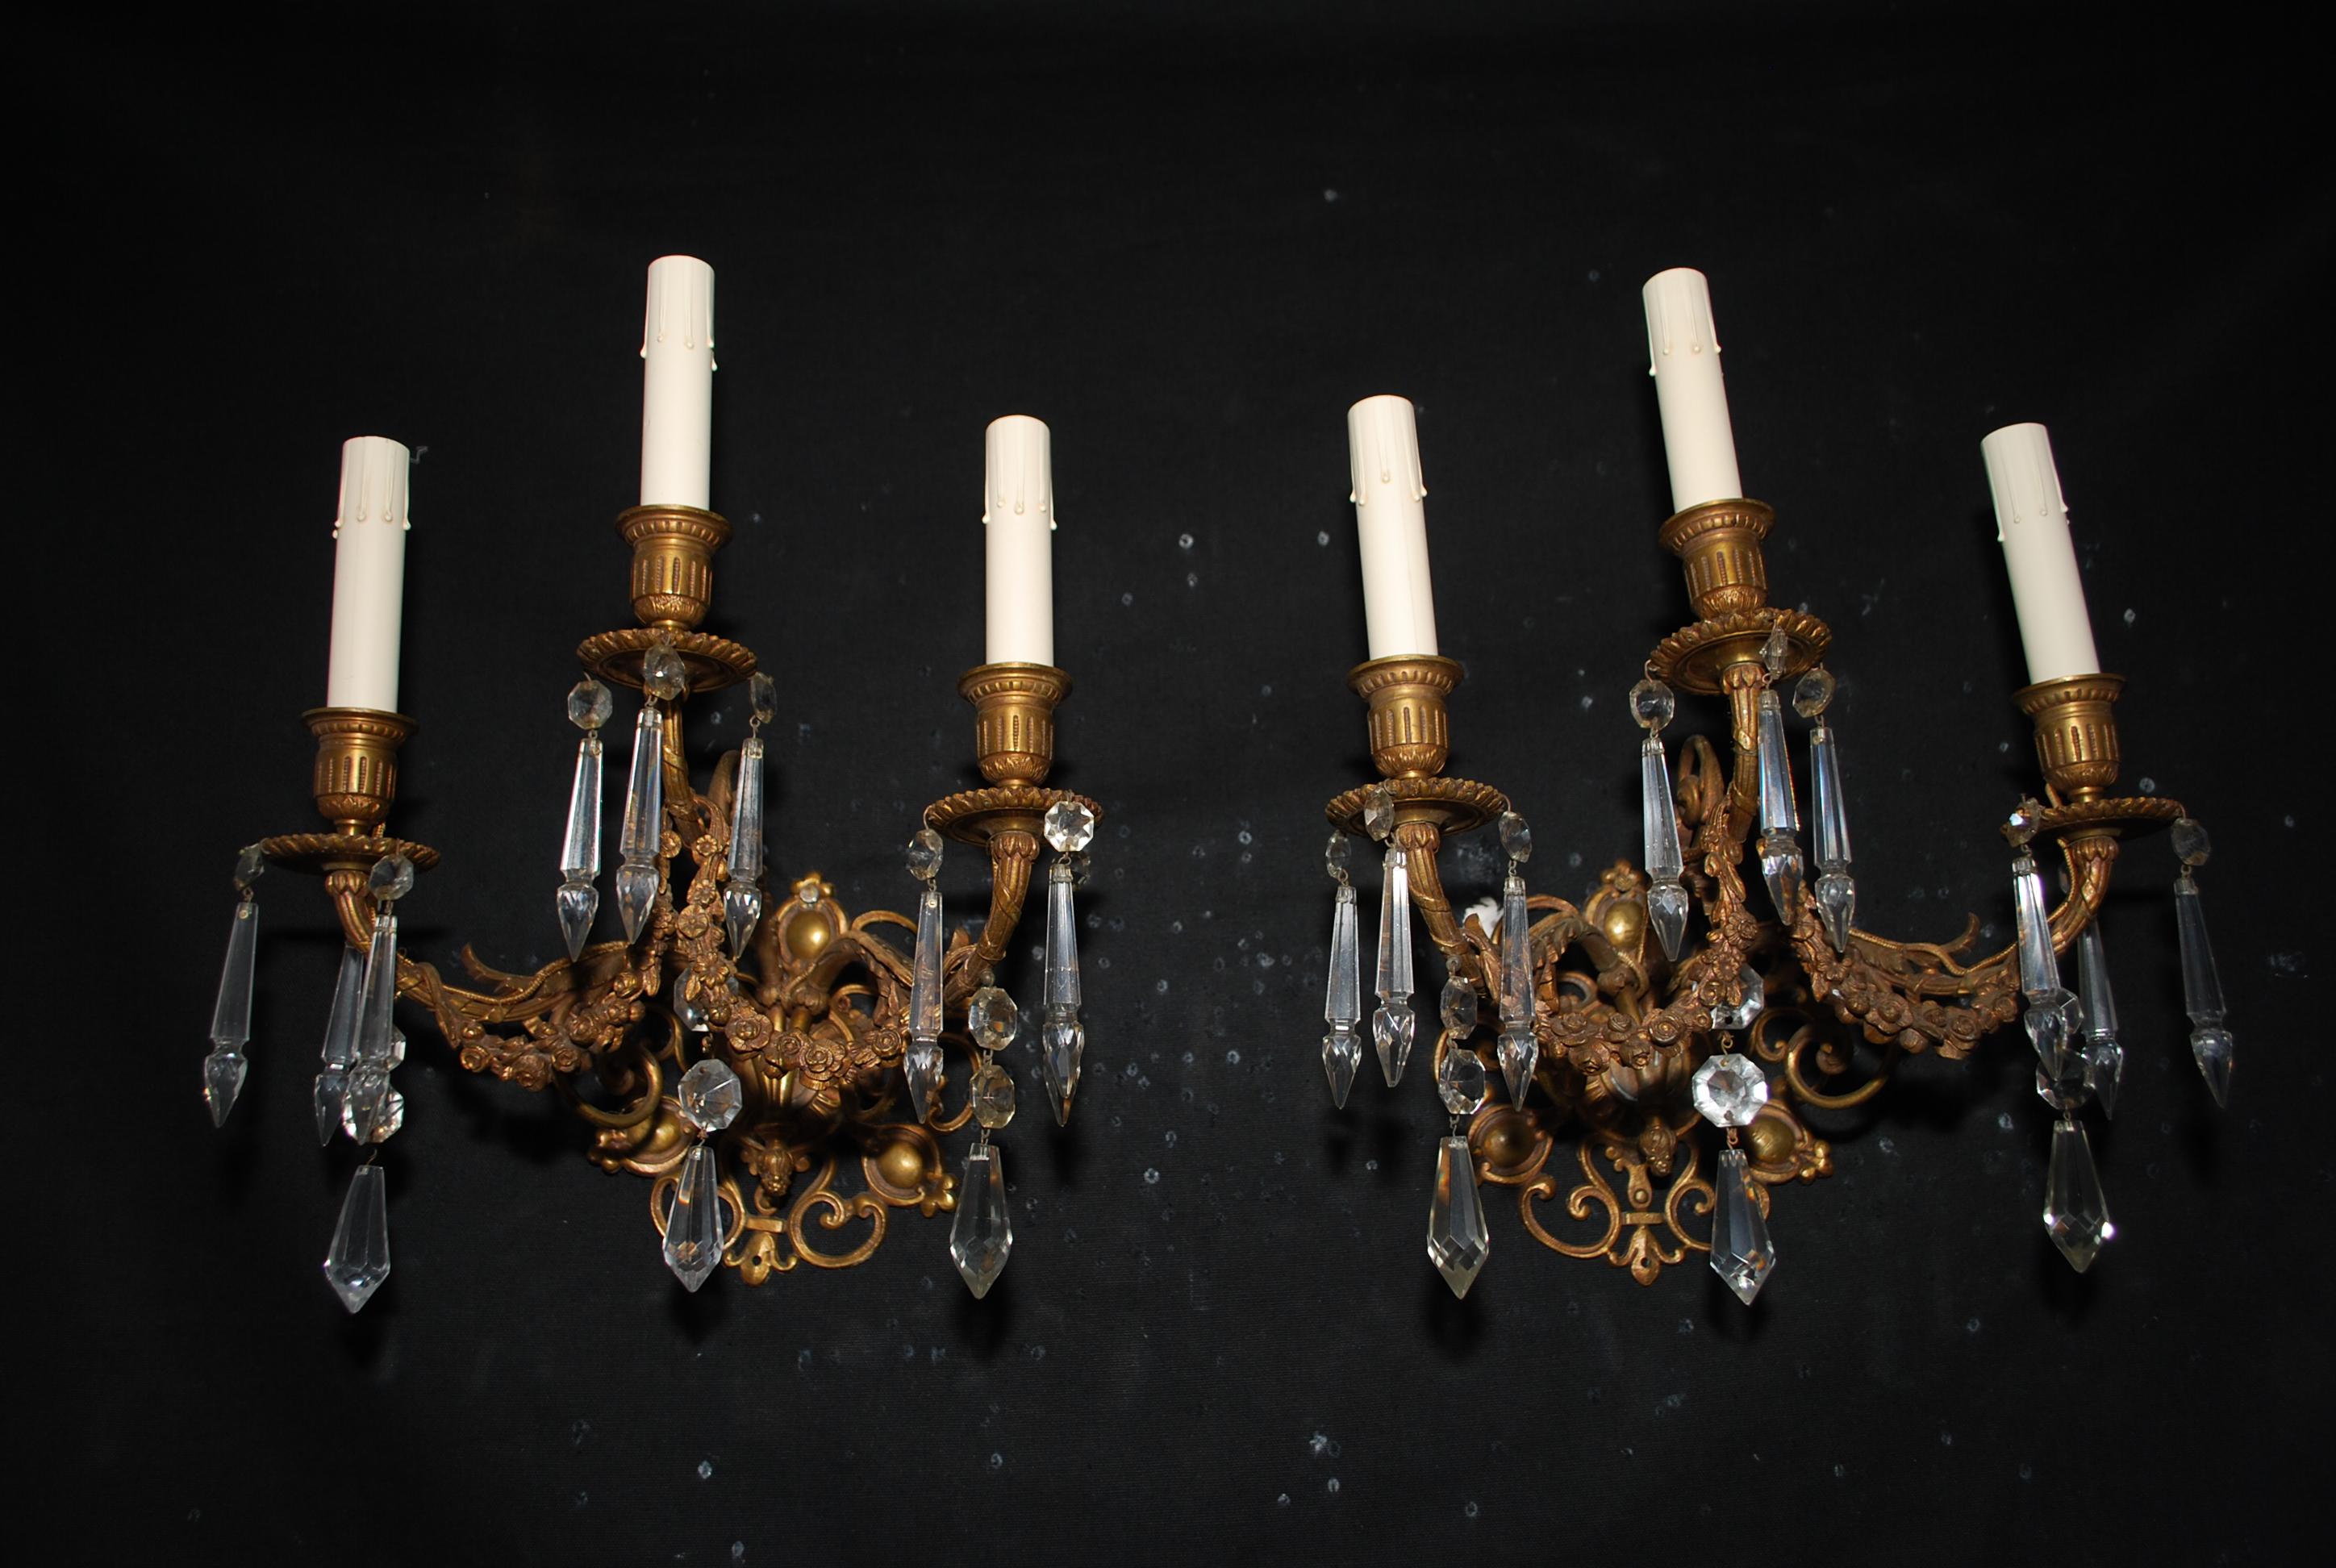 A beautiful pair of late 19th century French bronze sconces, the patina is so much nicer in person, and the details are amazing, the flash of the camera distorted a little the true beauty of the sconces.